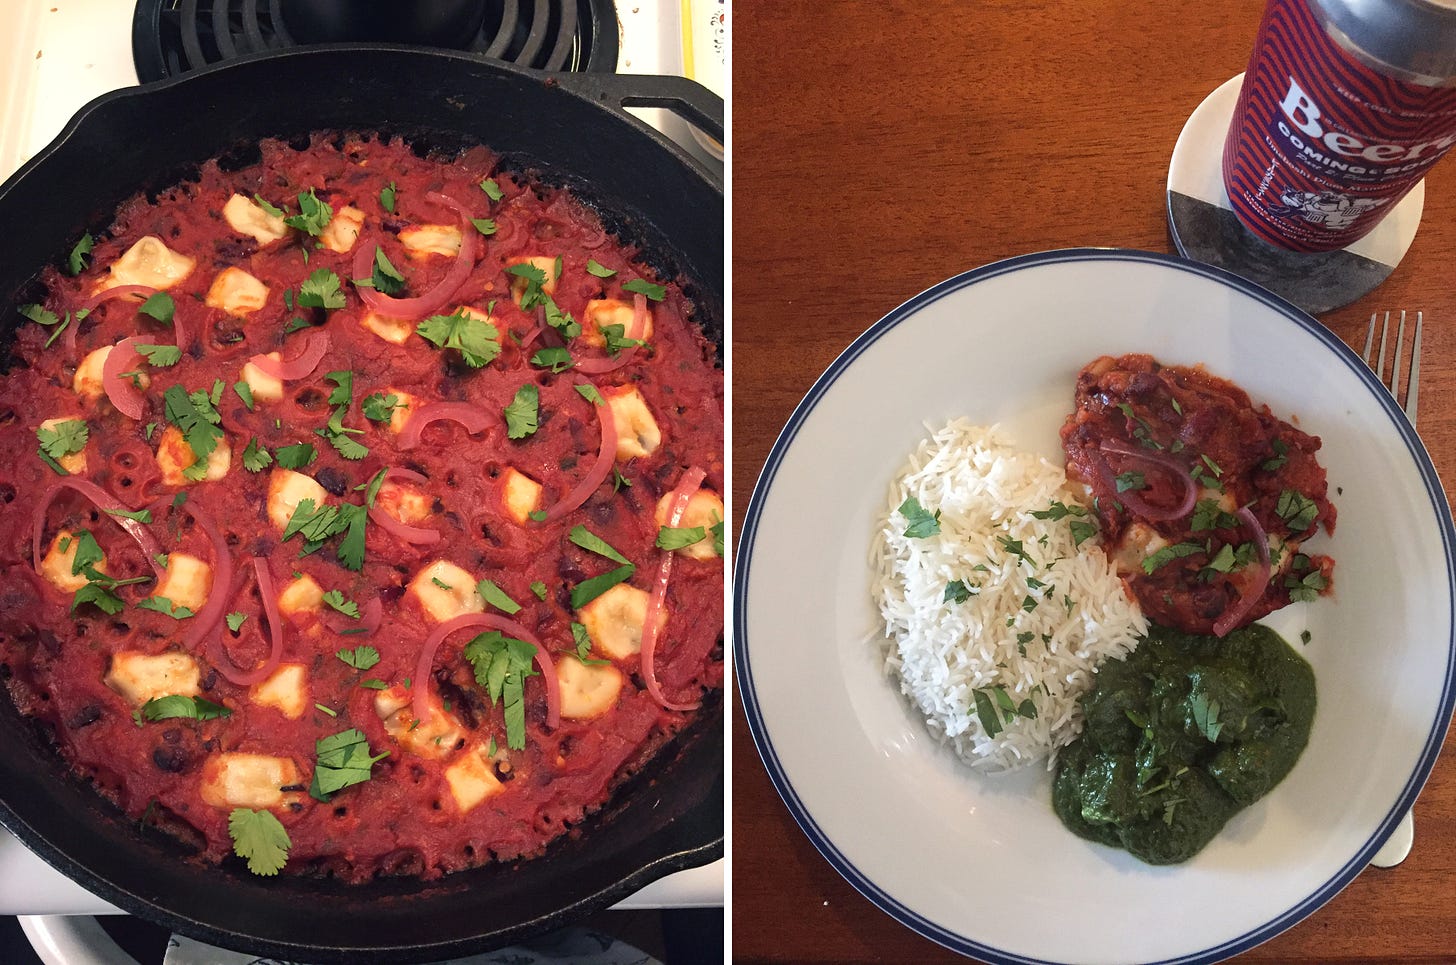 Left image: a large cast iron pan full of the rajma, dotted with bits of cheeze and sprinkled with pickled onion and cilantro. Right image: On a white plate, a serving of the rajma sits next to a serving of green saag paneer and a pile of white basmati rice. Everything is dusted with cilantro, and a can of beer is on a coaster next to the plate.